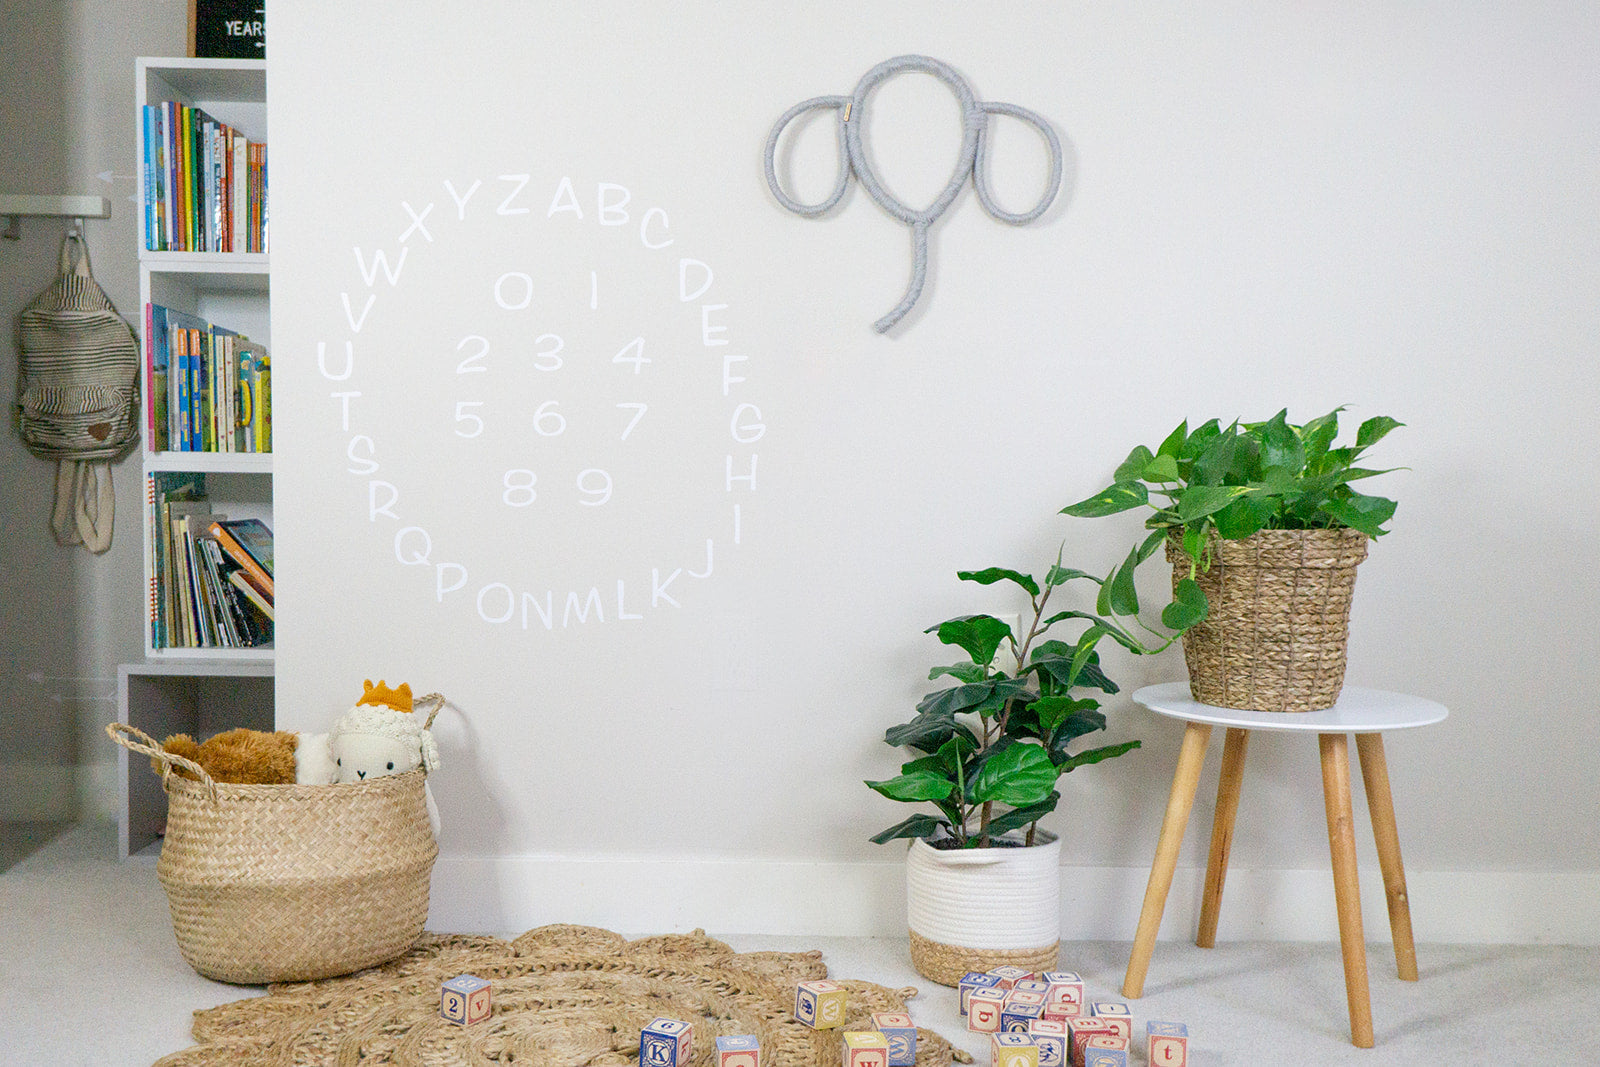 SALE - Alphabet & Numbers Wall Decals * Please read listing